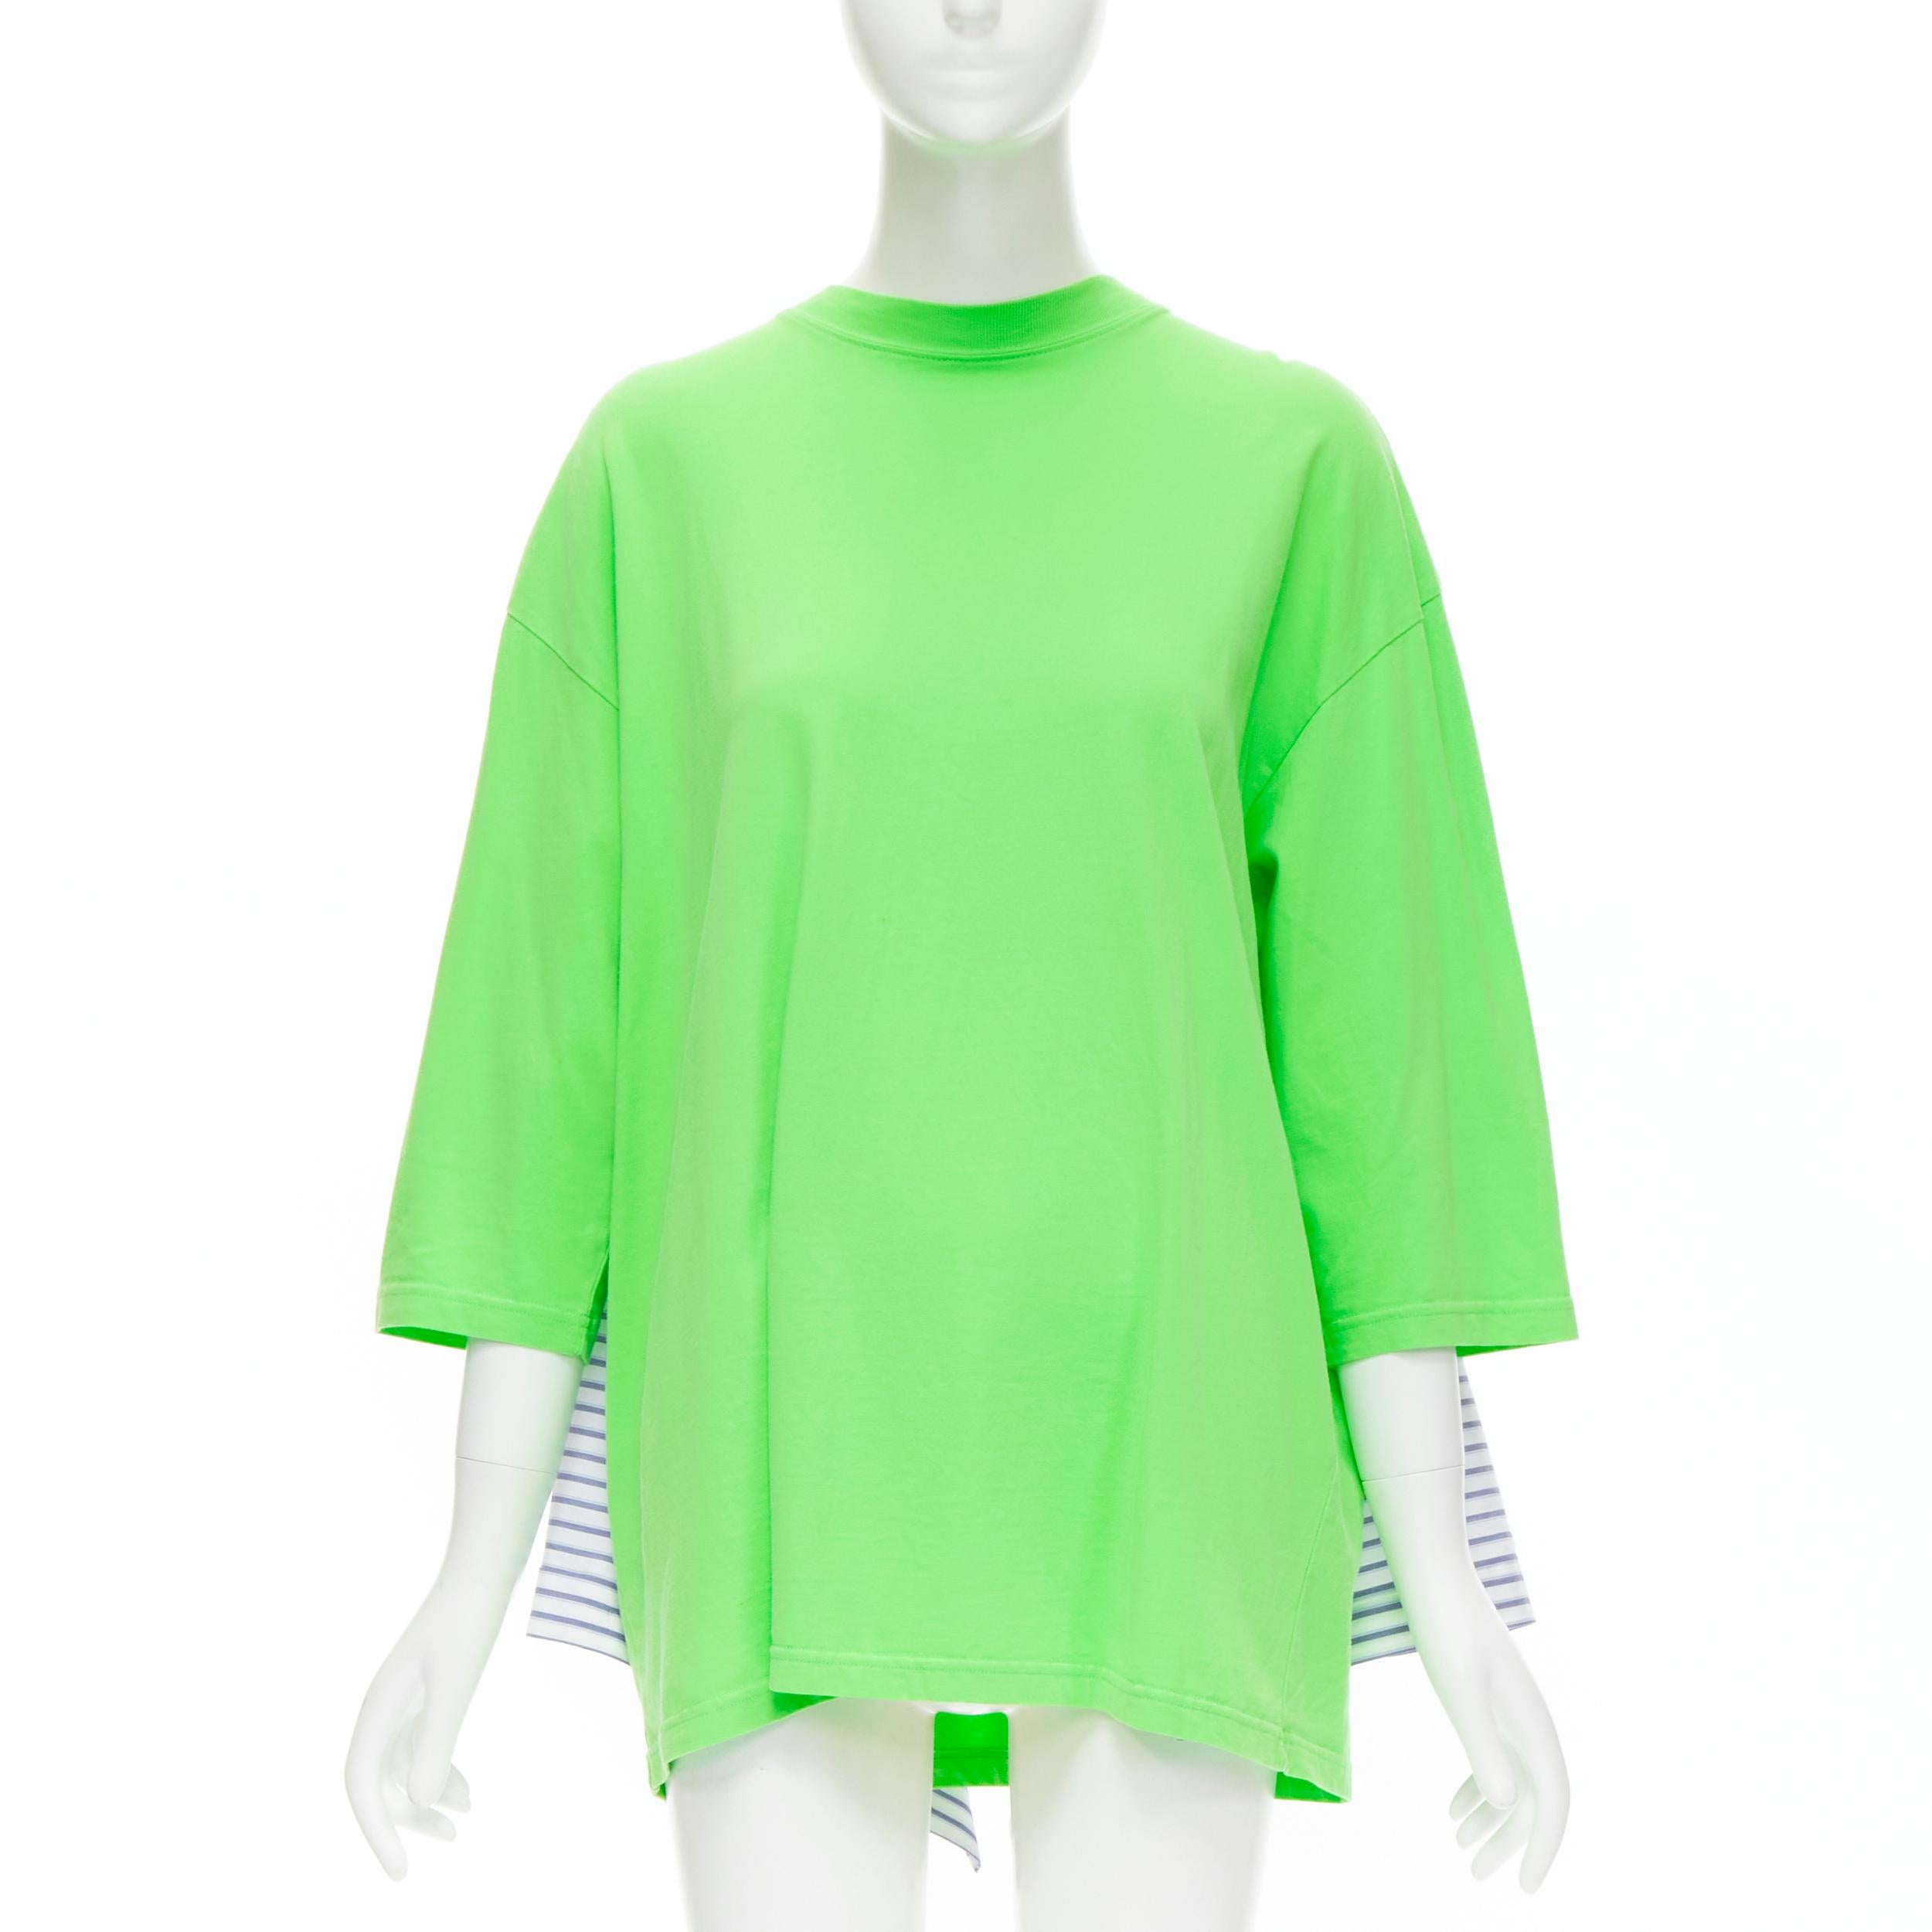 new BALENCIAGA 2017 green tshirt blue striped shirt 2 way draped top FR34 XS 
Reference: MELK/A00121 
Brand: Balenciaga 
Designer: Demna 
Collection: 2017 
Material: Cotton 
Color: Green 
Pattern: Striped 
Extra Detail: The shirt can be worn 2 ways.